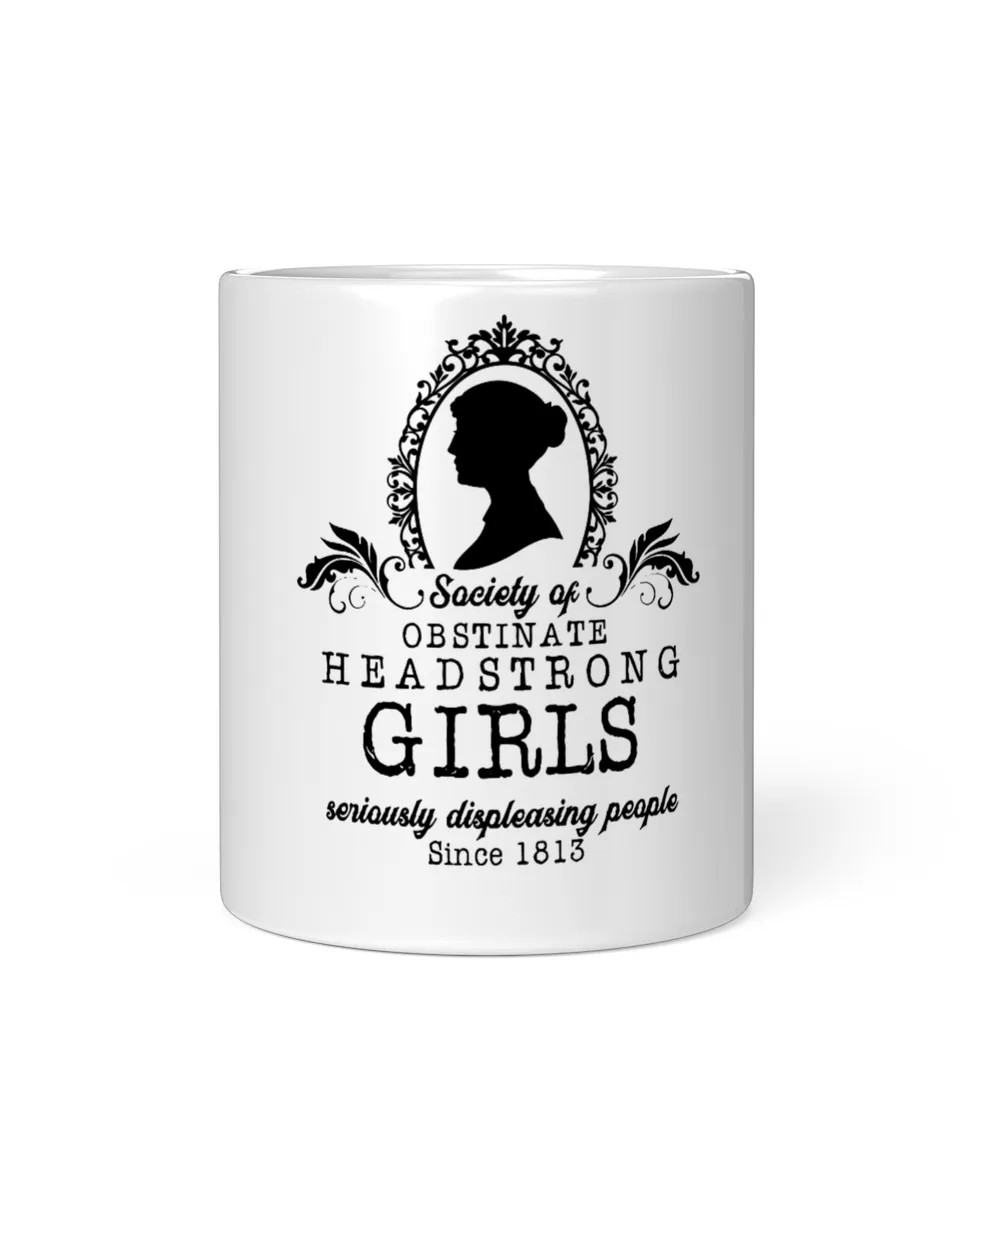 Jane Austen Journal Society for Obstinate Headstrong Girls: Seriously Displeasing People shirt